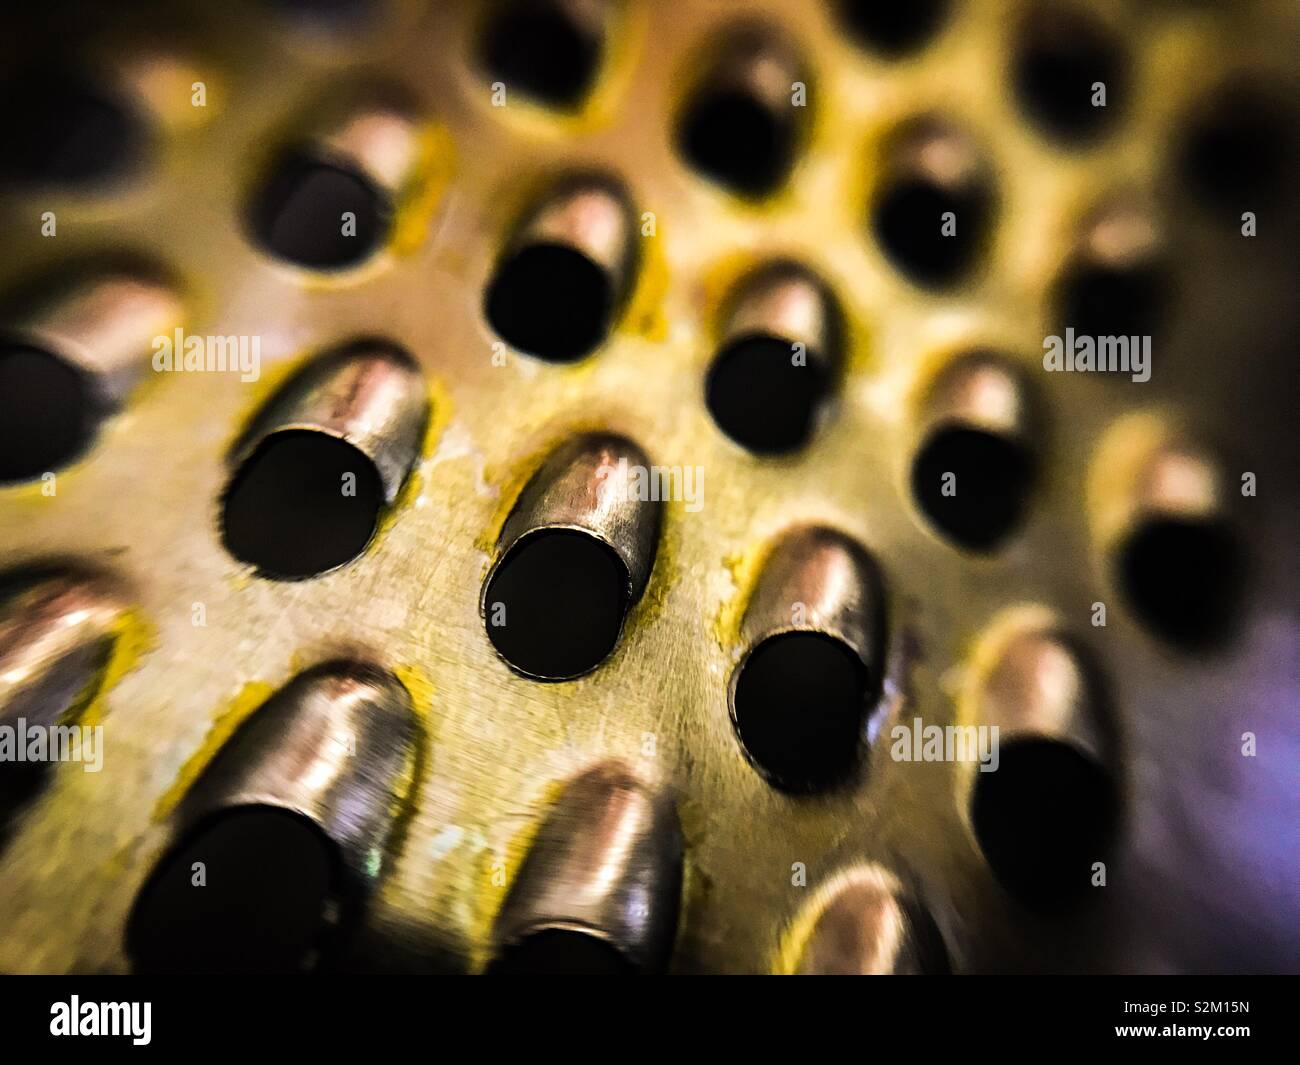 Cheese grater Stock Photo